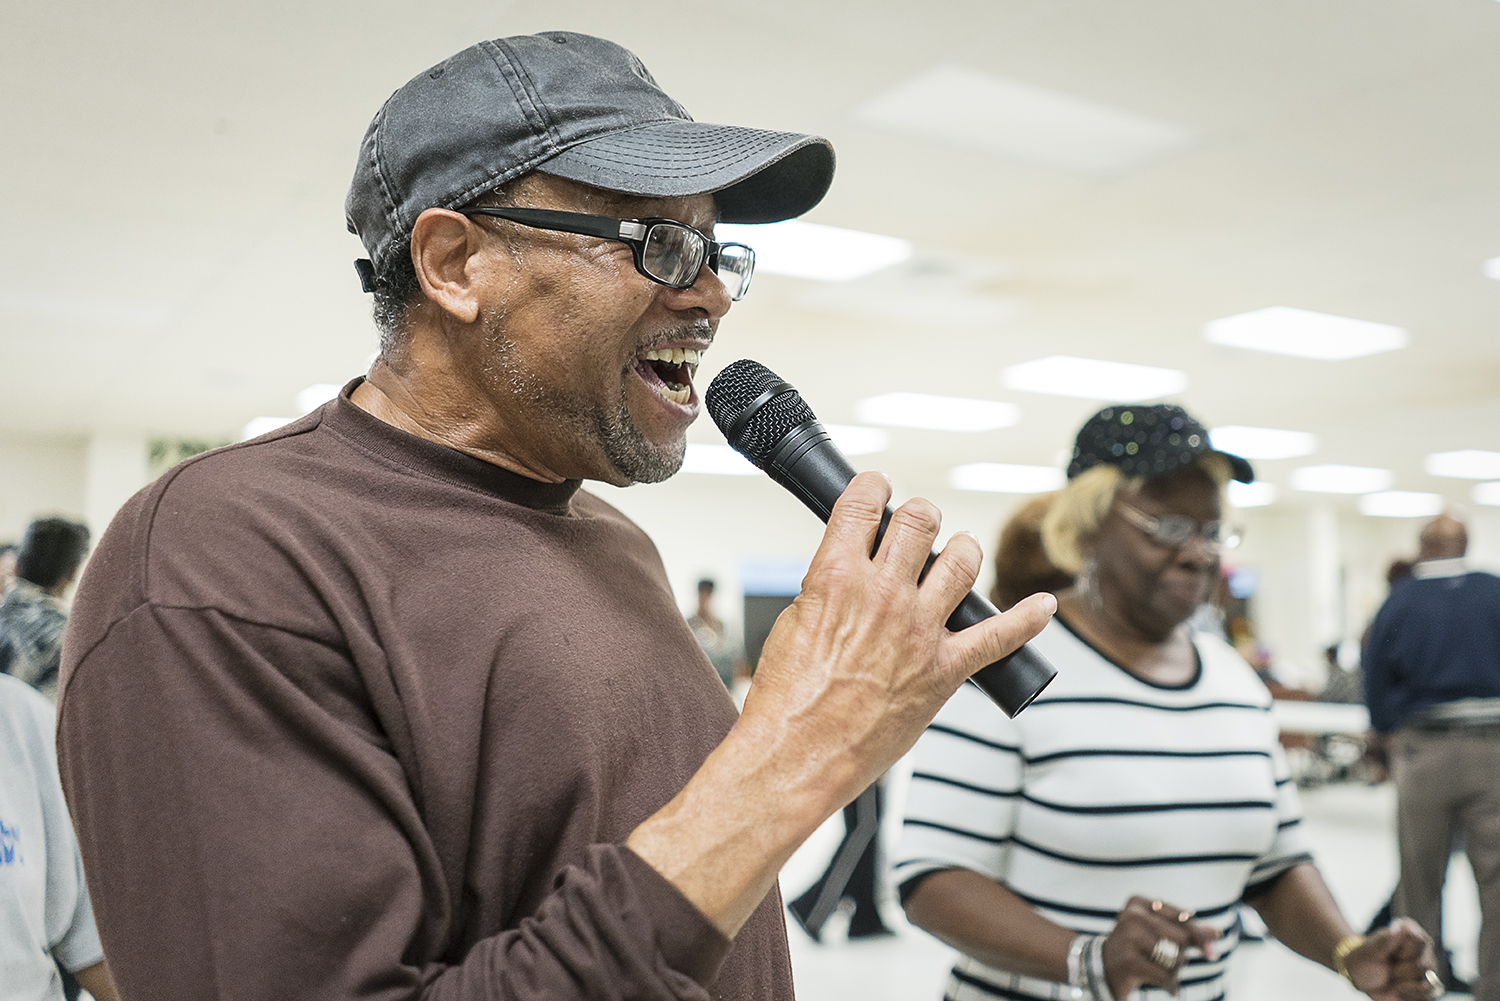 Gardell Haralson, 64, from Flint, calls out steps as the Hustlers dance at the Hasselbring Senior Community Center. Haralson earns little money from the two classes he teaches each week, insisting the money go to the center for improvements. "Some pe